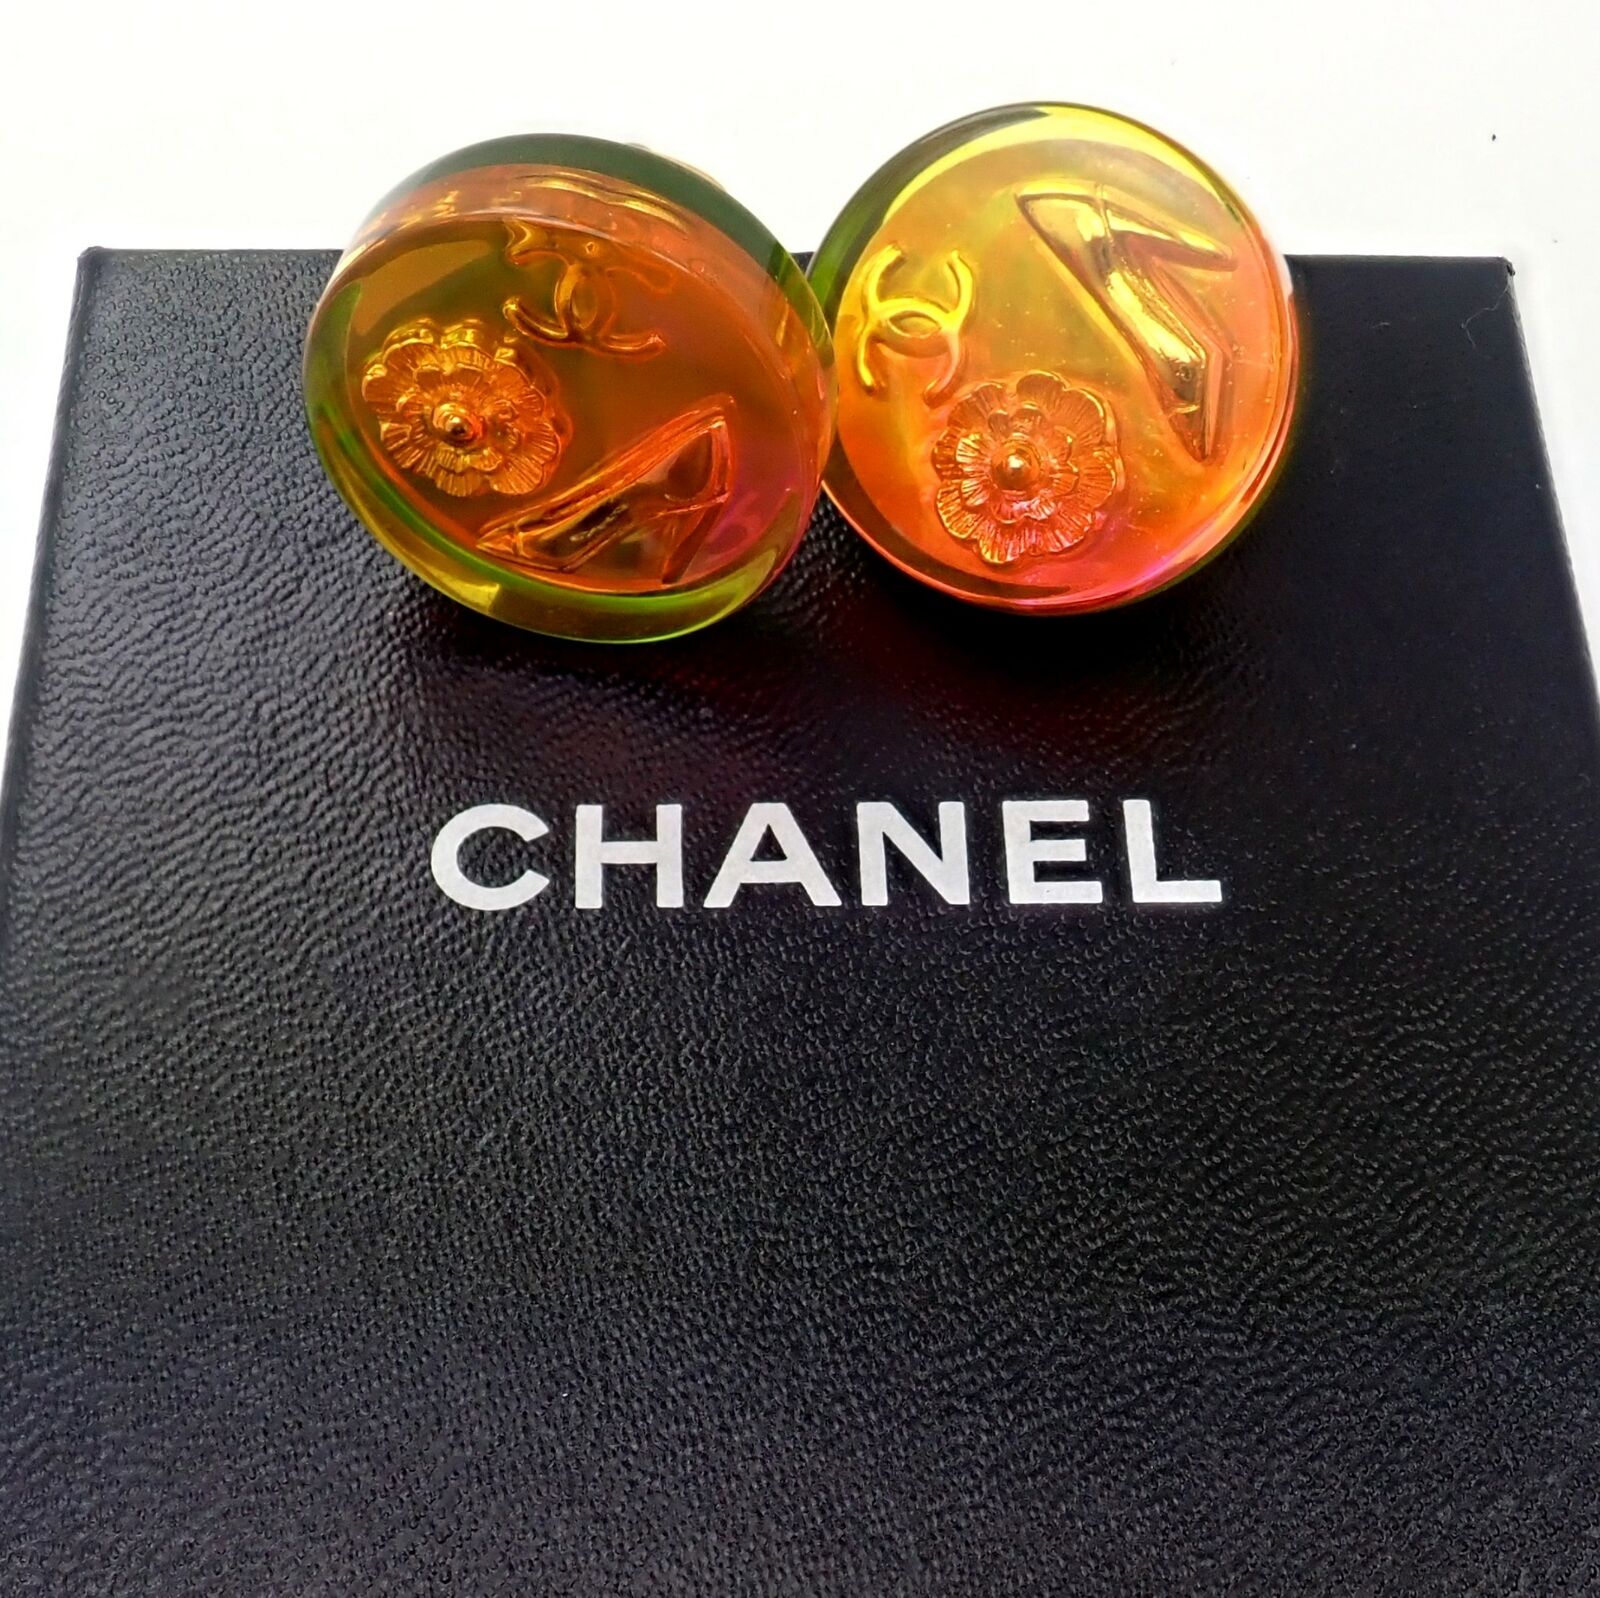 Chanel Jewelry & Watches:Fashion Jewelry:Earrings Rare! Vintage Chanel Paris France Holographic Logo Camellia Earrings 1997 Spring